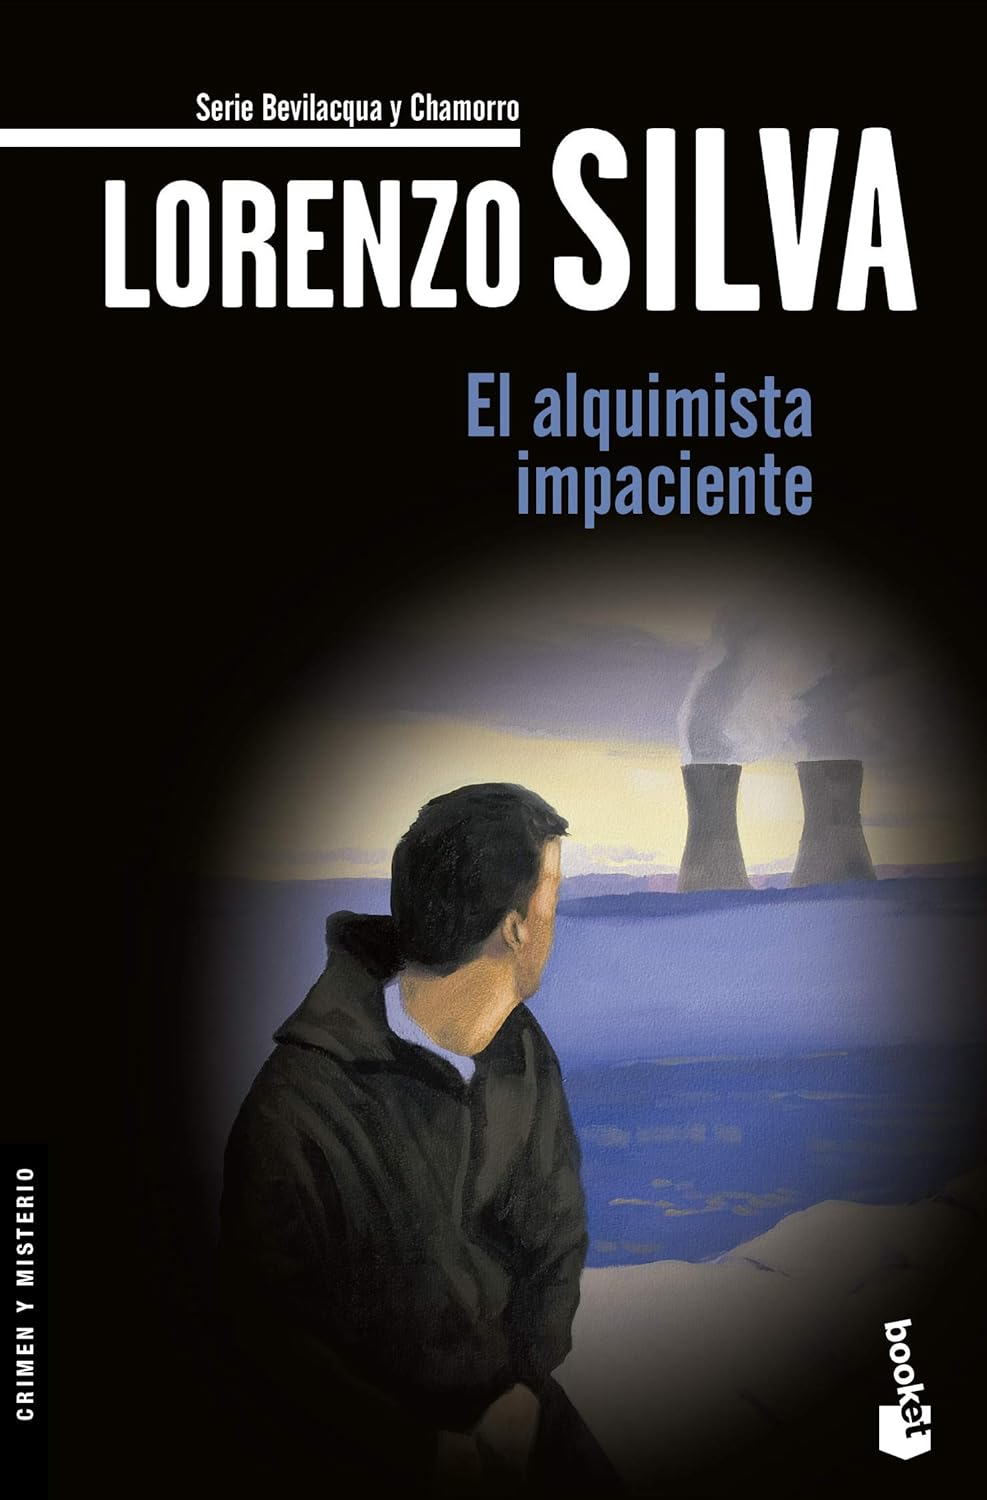 books about spain14